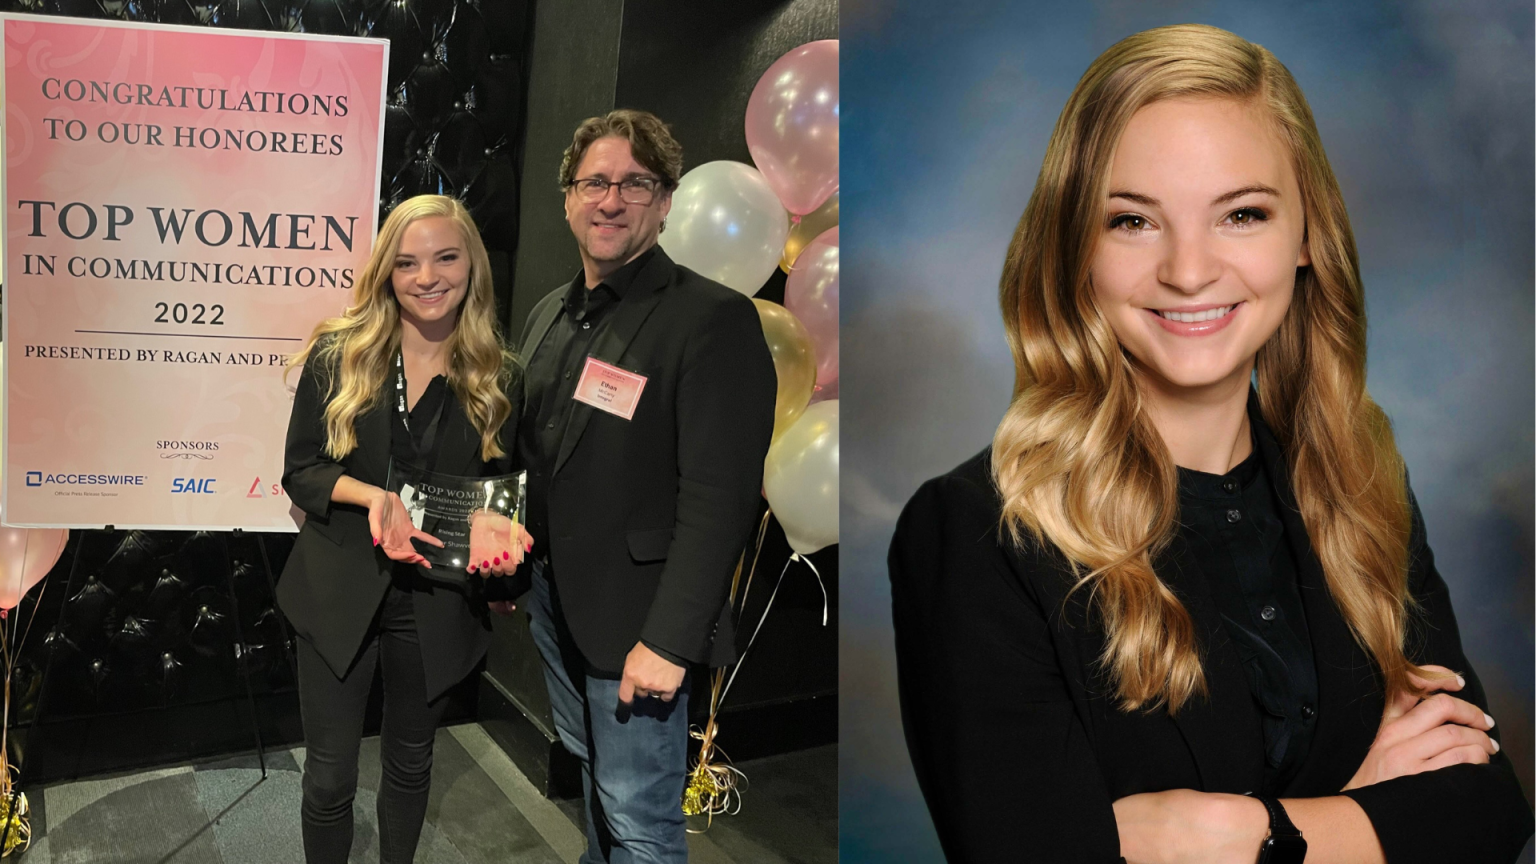 Taylor Shawver accepting an award, then Taylor's headshot on the right.